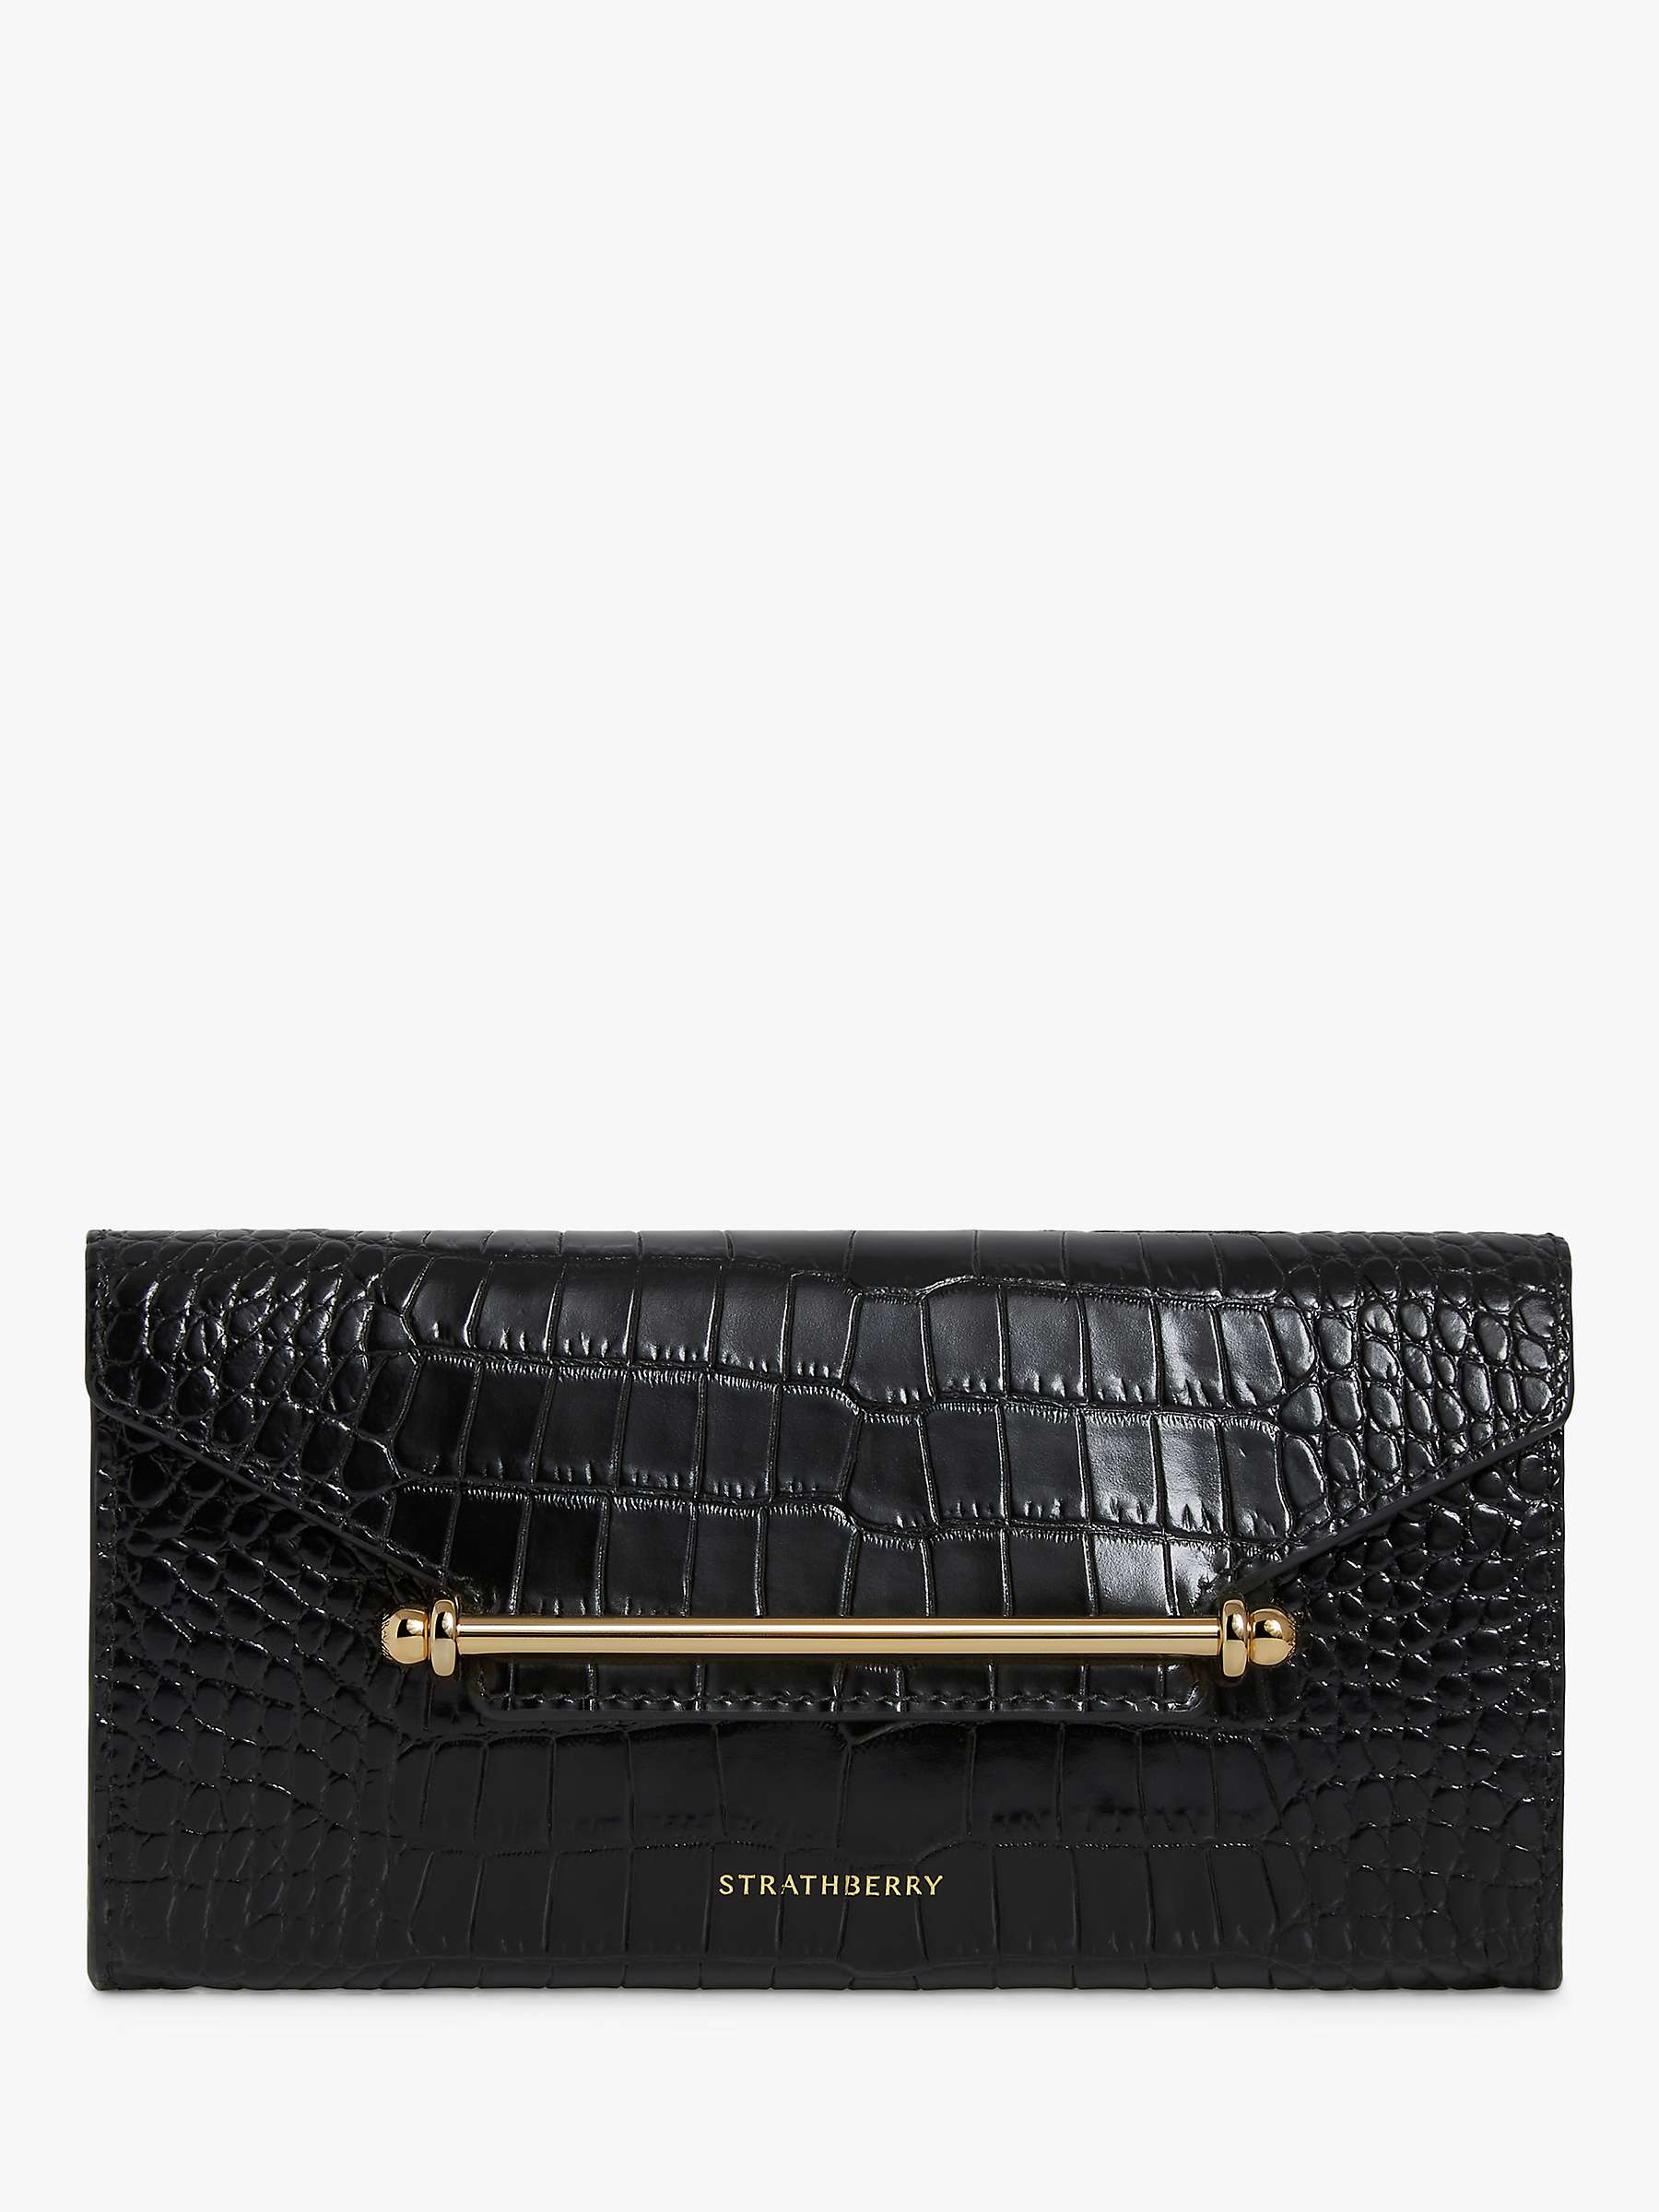 Strathberry Multrees Leather Wallet On Chain, Black Croc at John Lewis ...